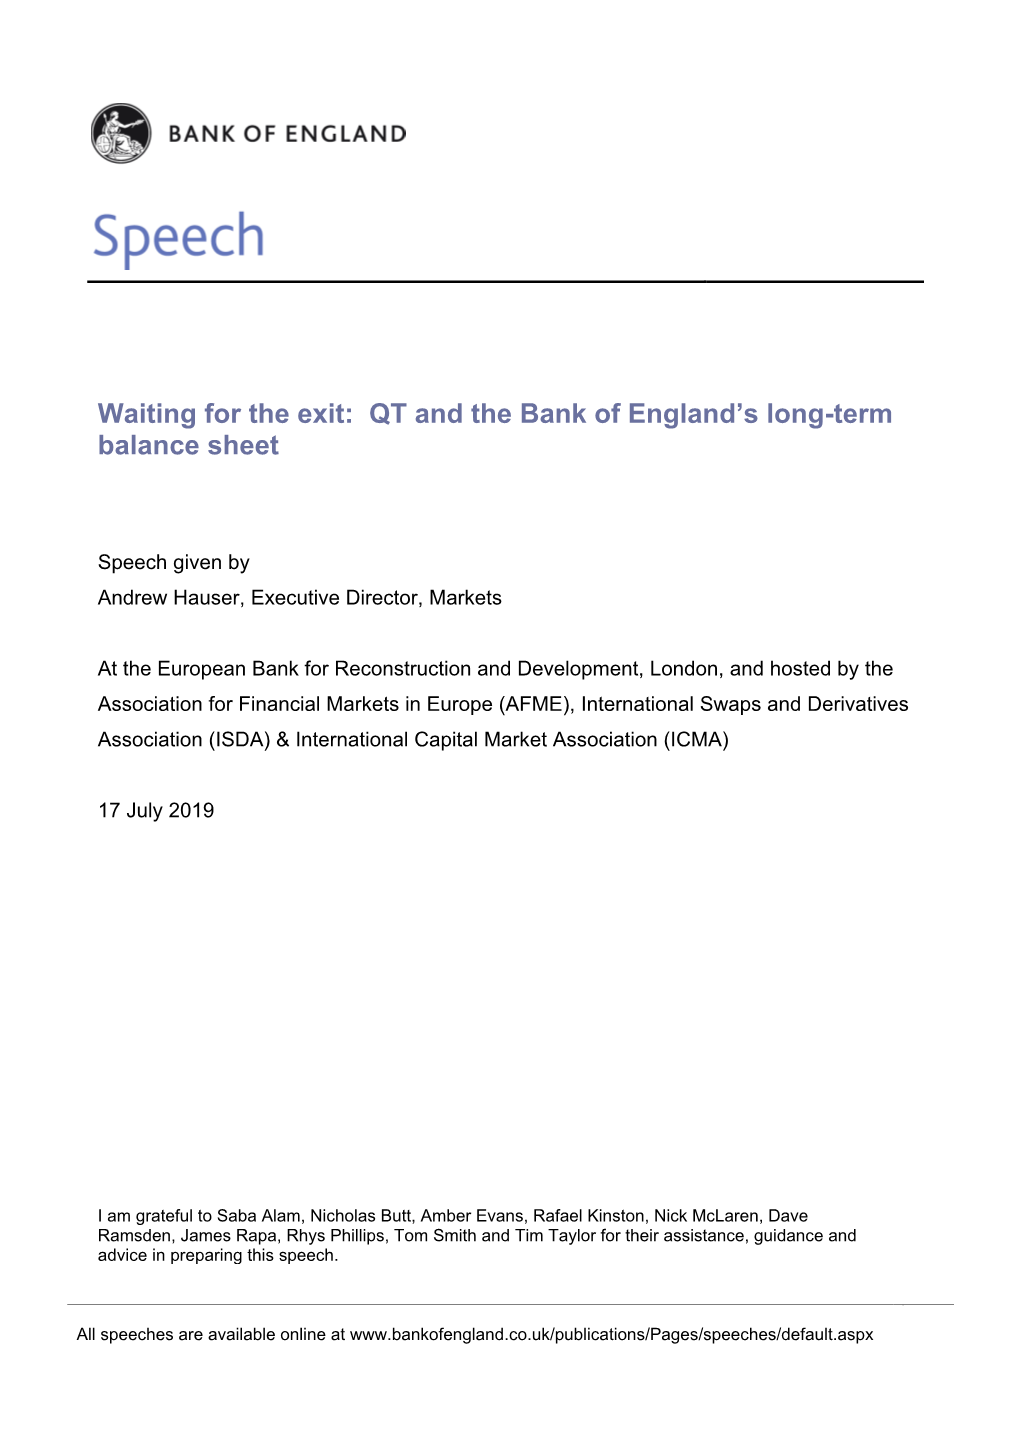 QT and the Bank of England's Long-Term Balance Sheet